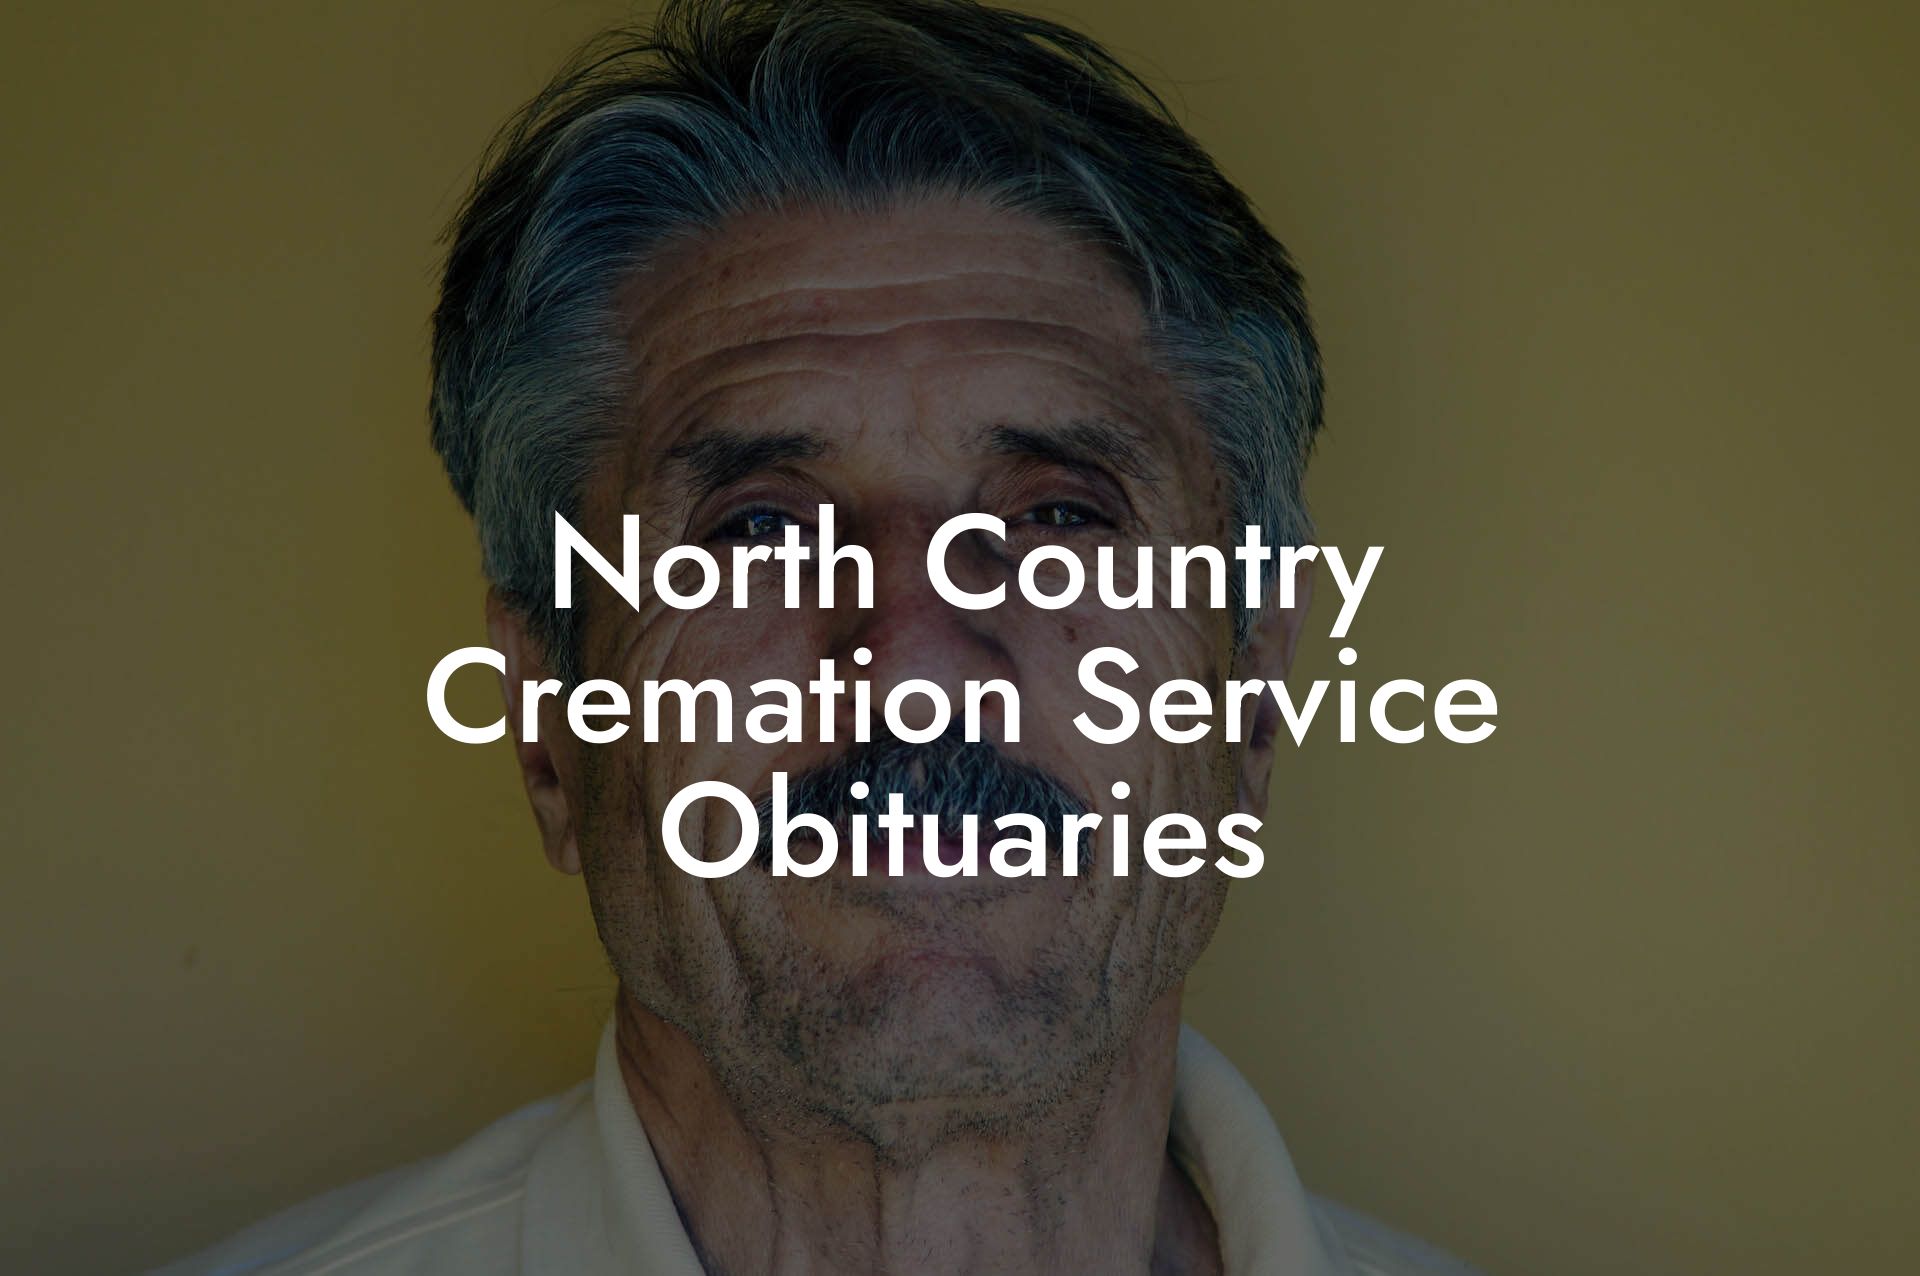 North Country Cremation Service Obituaries